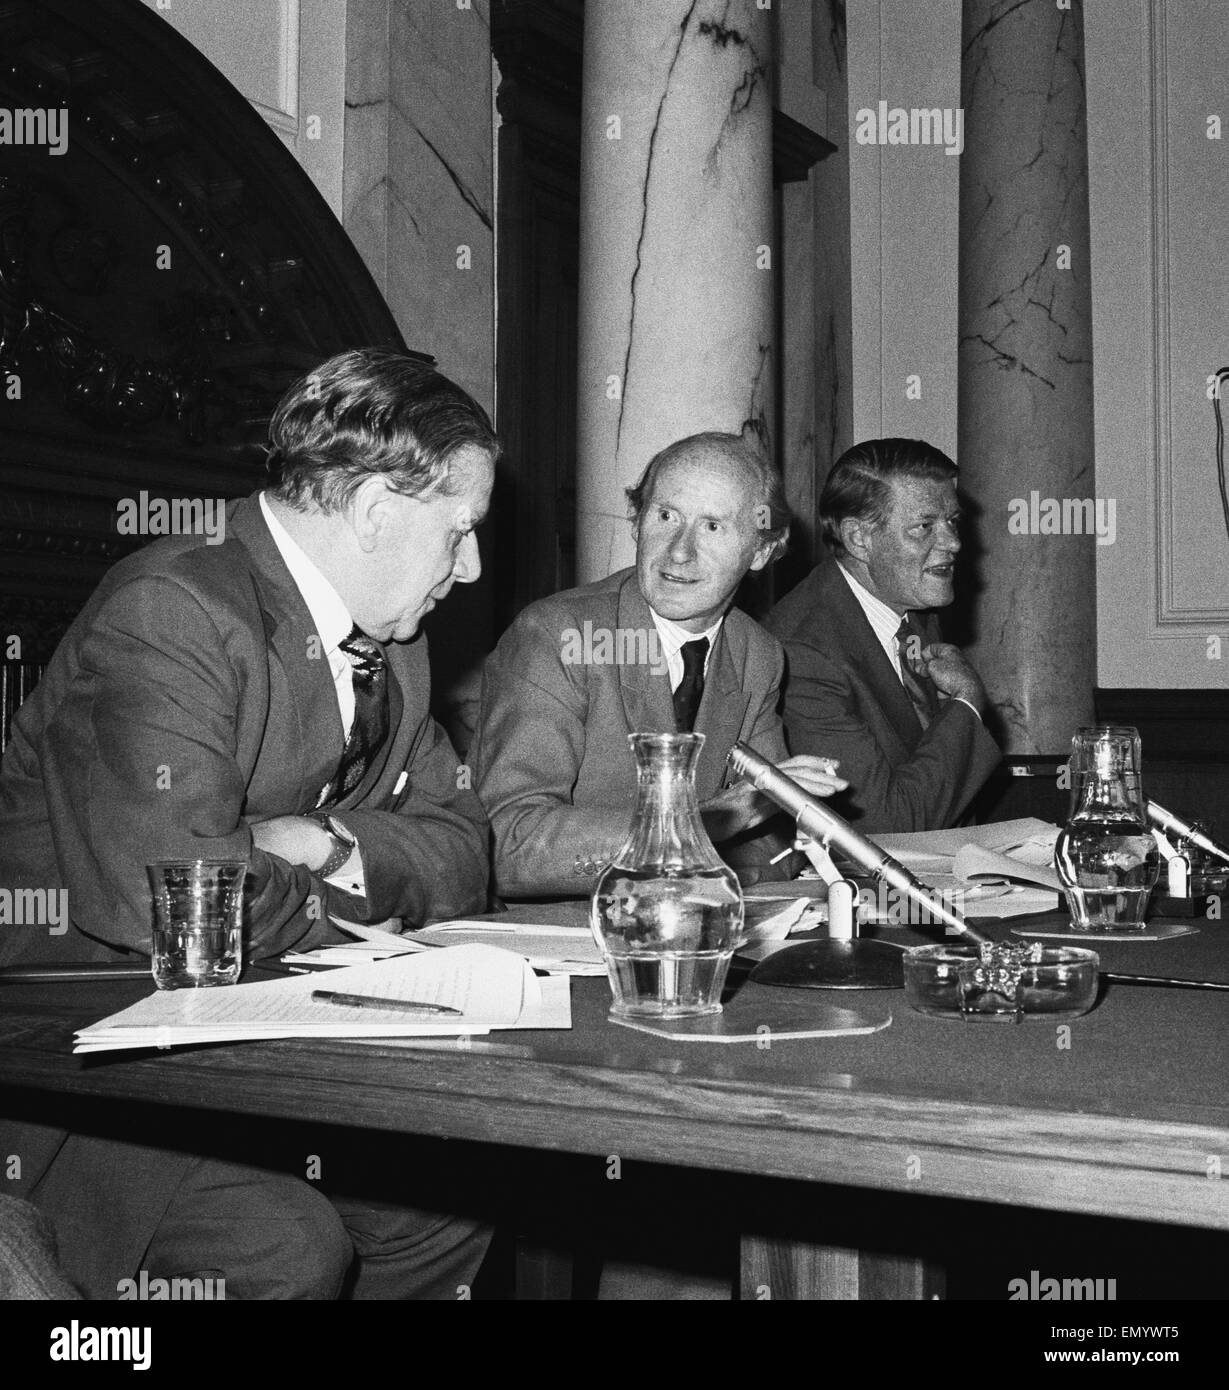 Chancellor of the Exchequer Anthony Barber with General Secratary of the TUC Vic Fether, during a press conference at the Treasury in Whitehall. Sitting on the right is Press Secretary to the Treasury Ronald Hayles. 23rd August 1973. Stock Photo